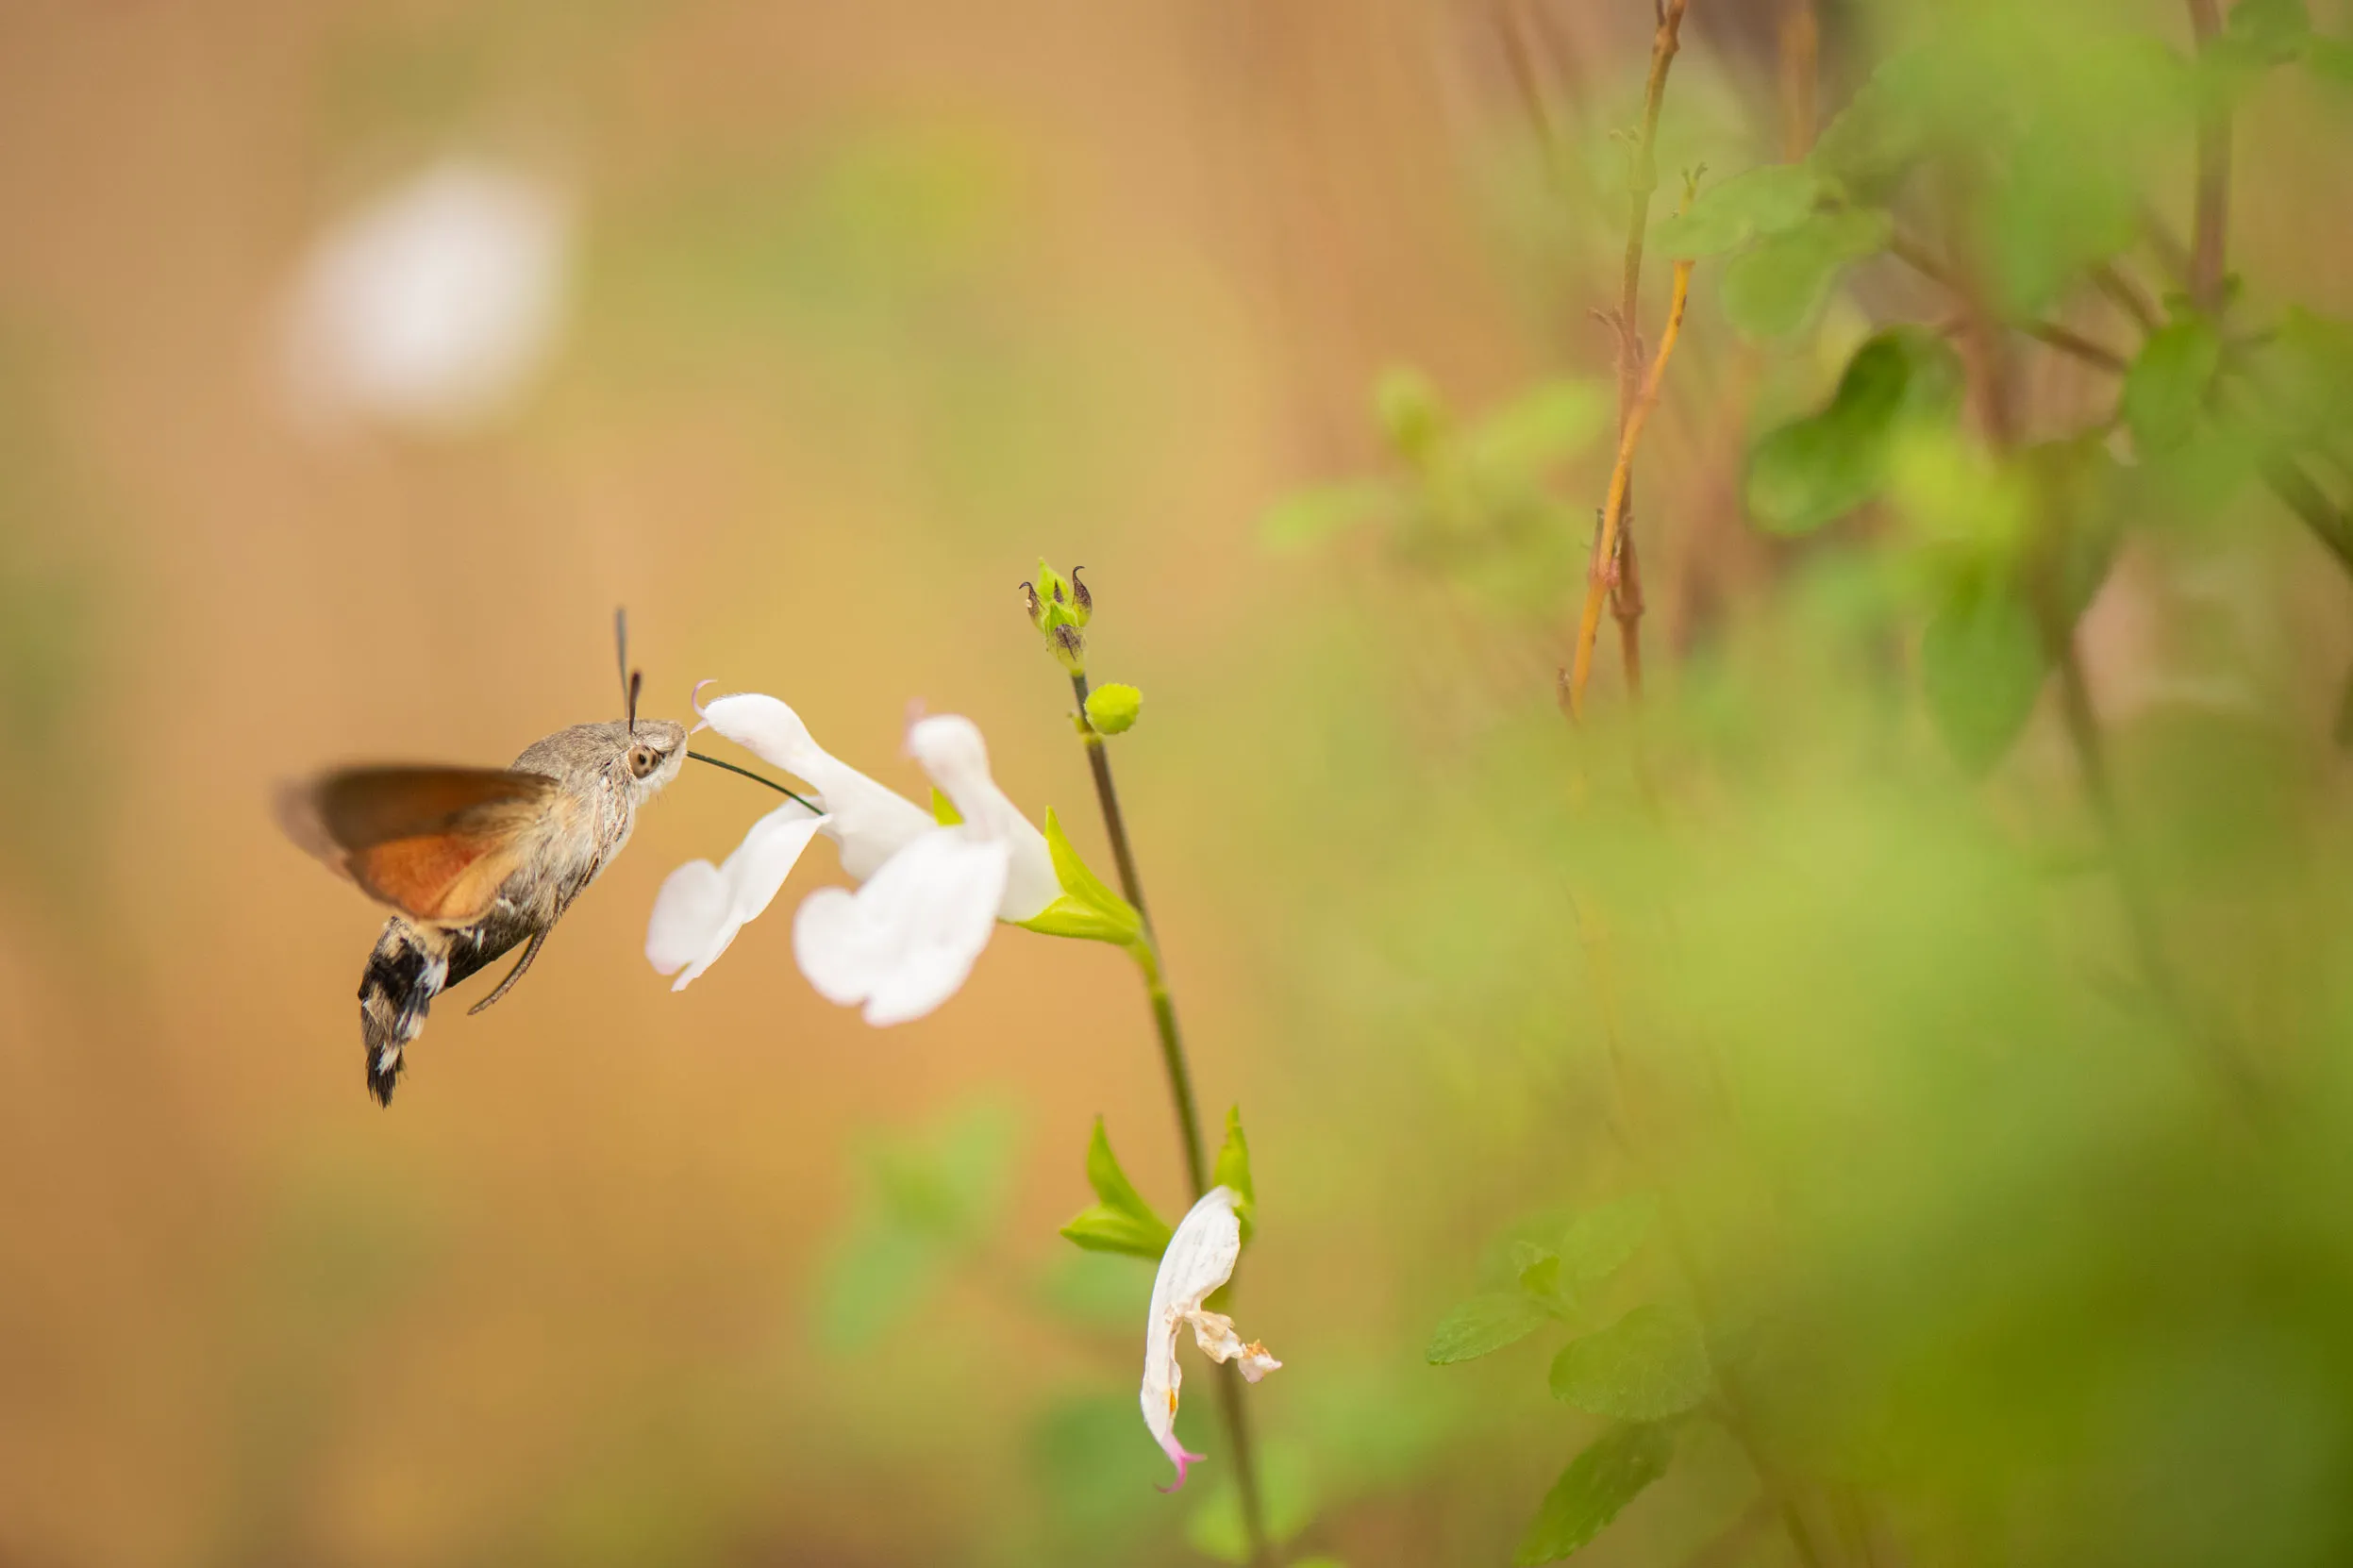 A Hummingbird Hawkmoth on a white flower.